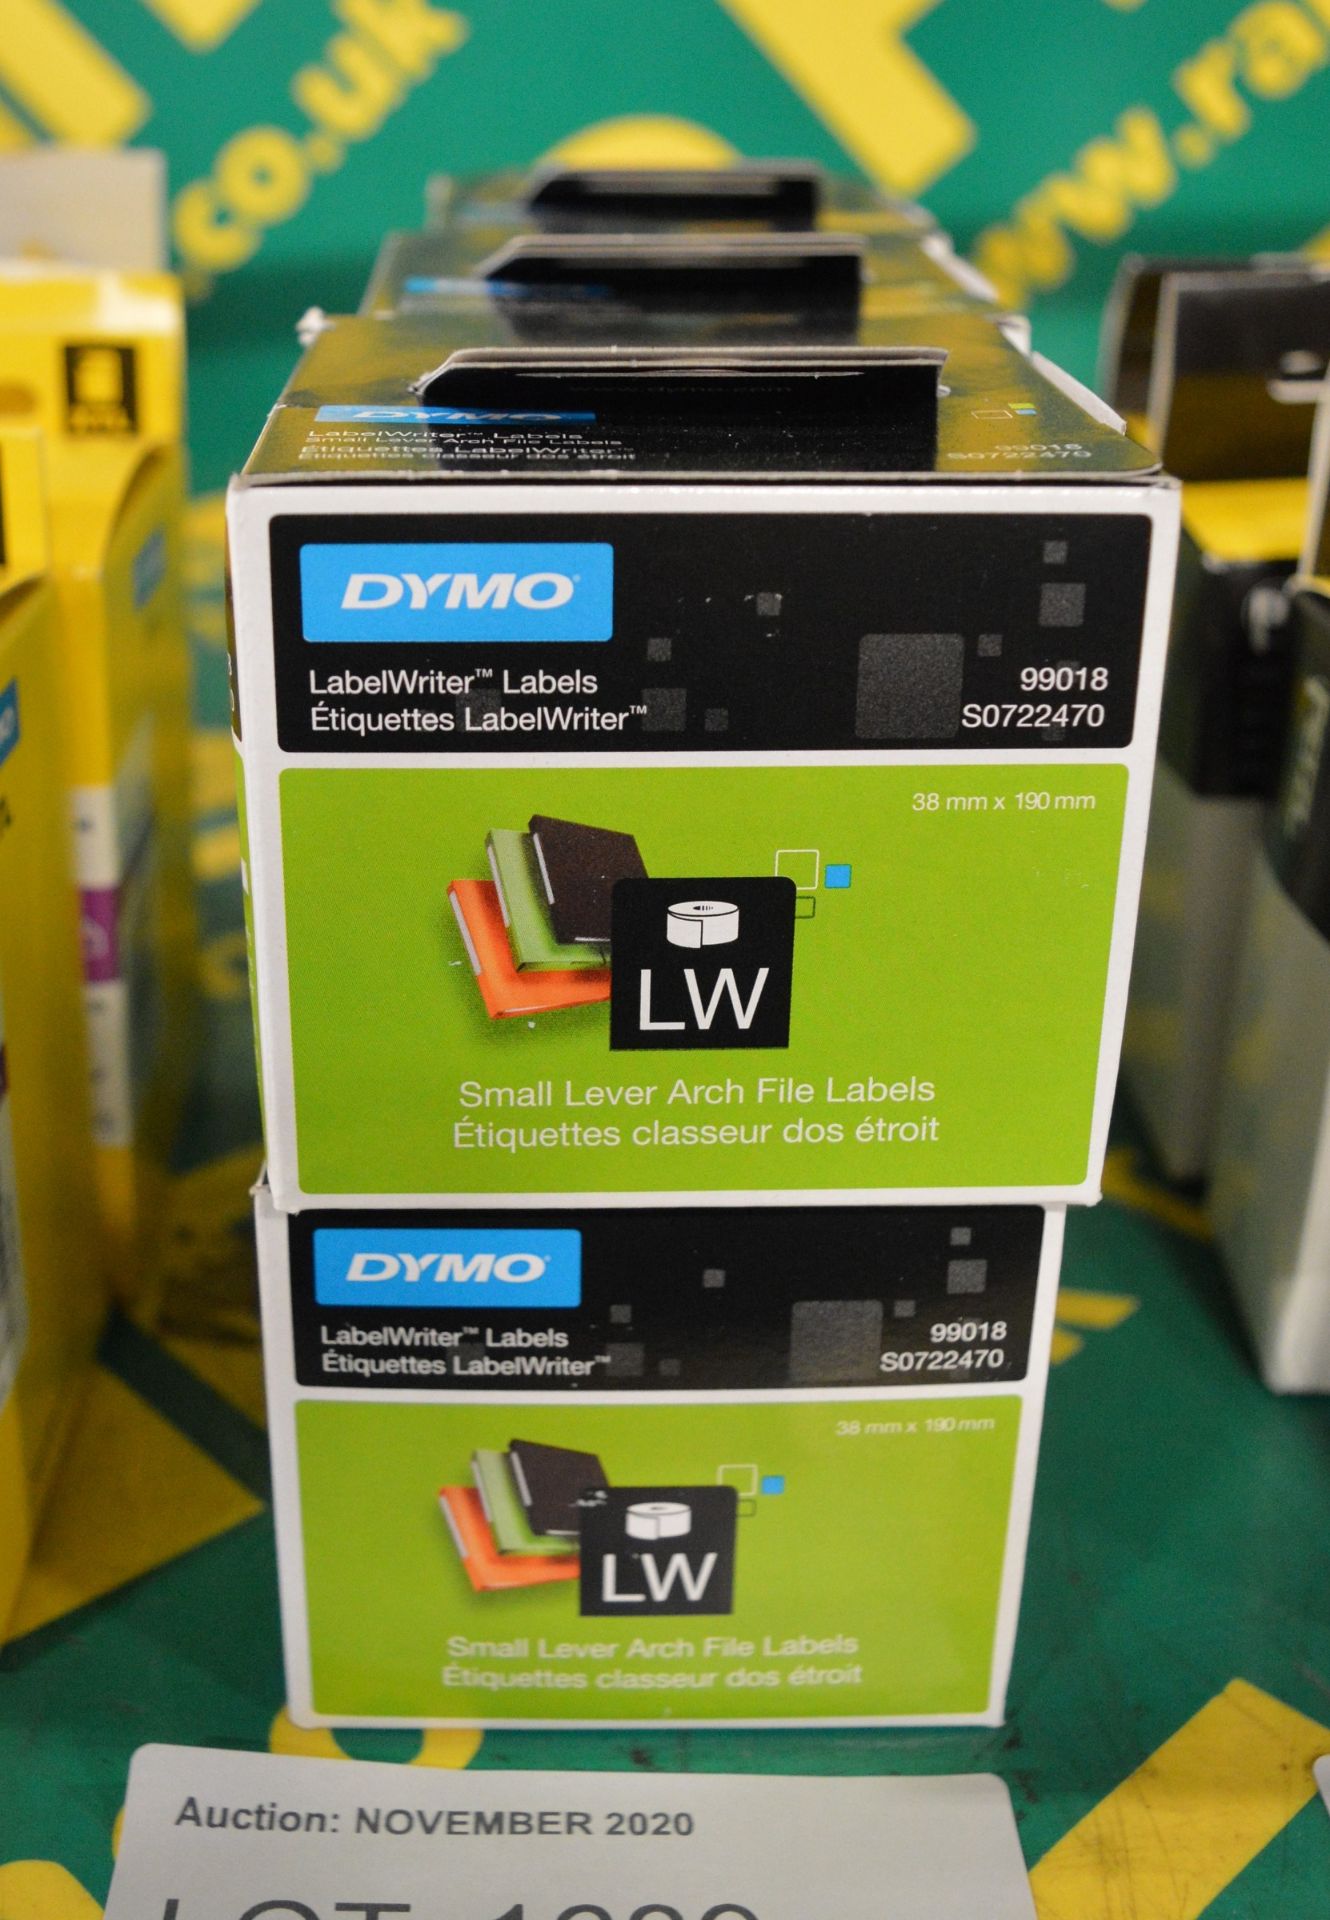 6x Dymo LW Small Lever Arch File Labels - 38 x 190mm